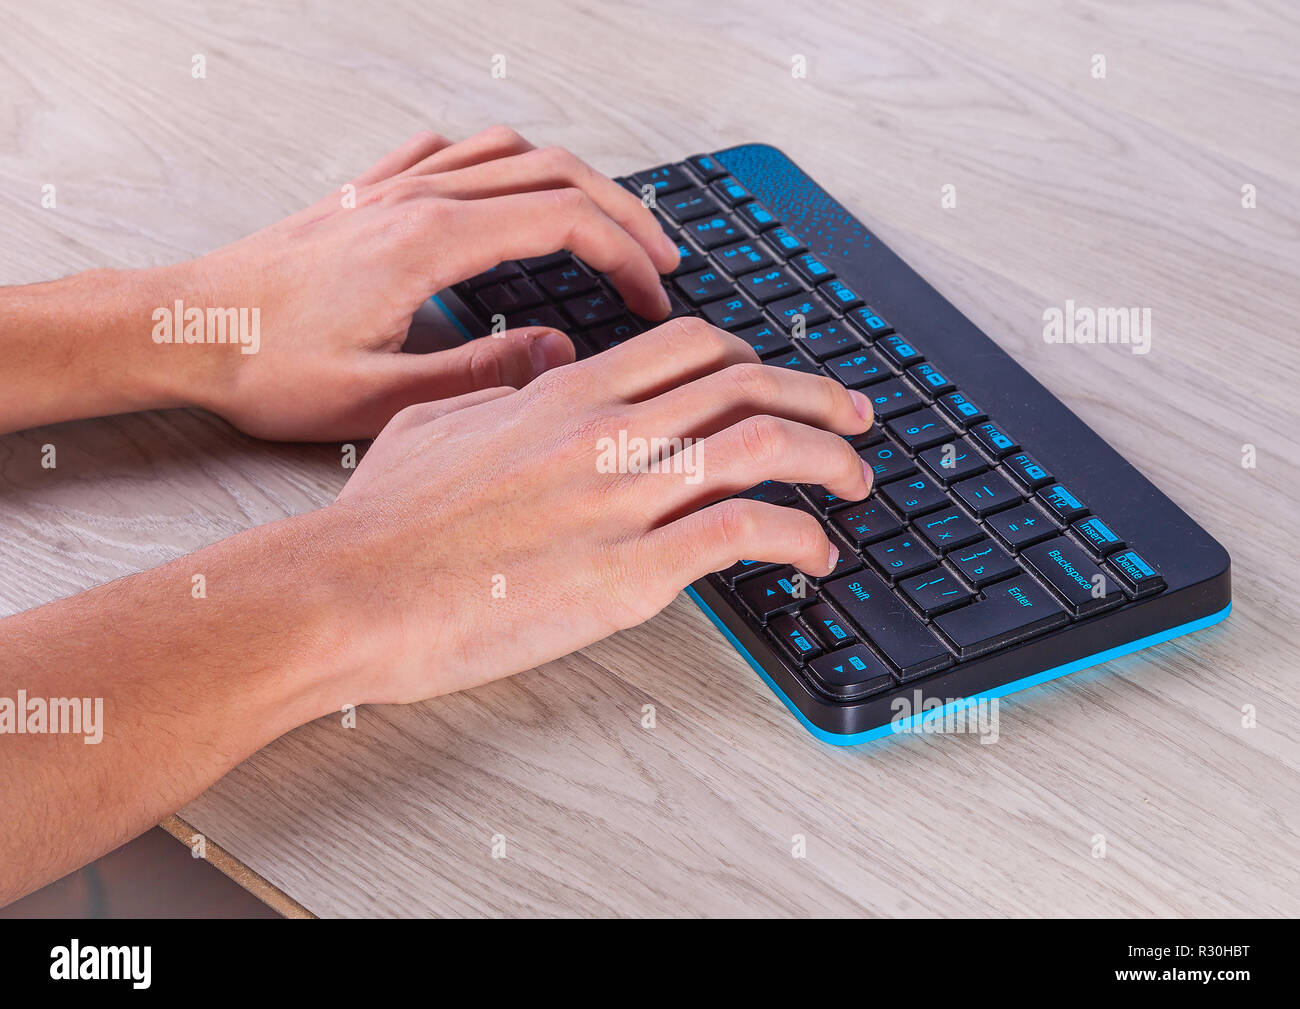 A man is typing on a wireless keyboard. Hands keyboard. Light background. Stock Photo